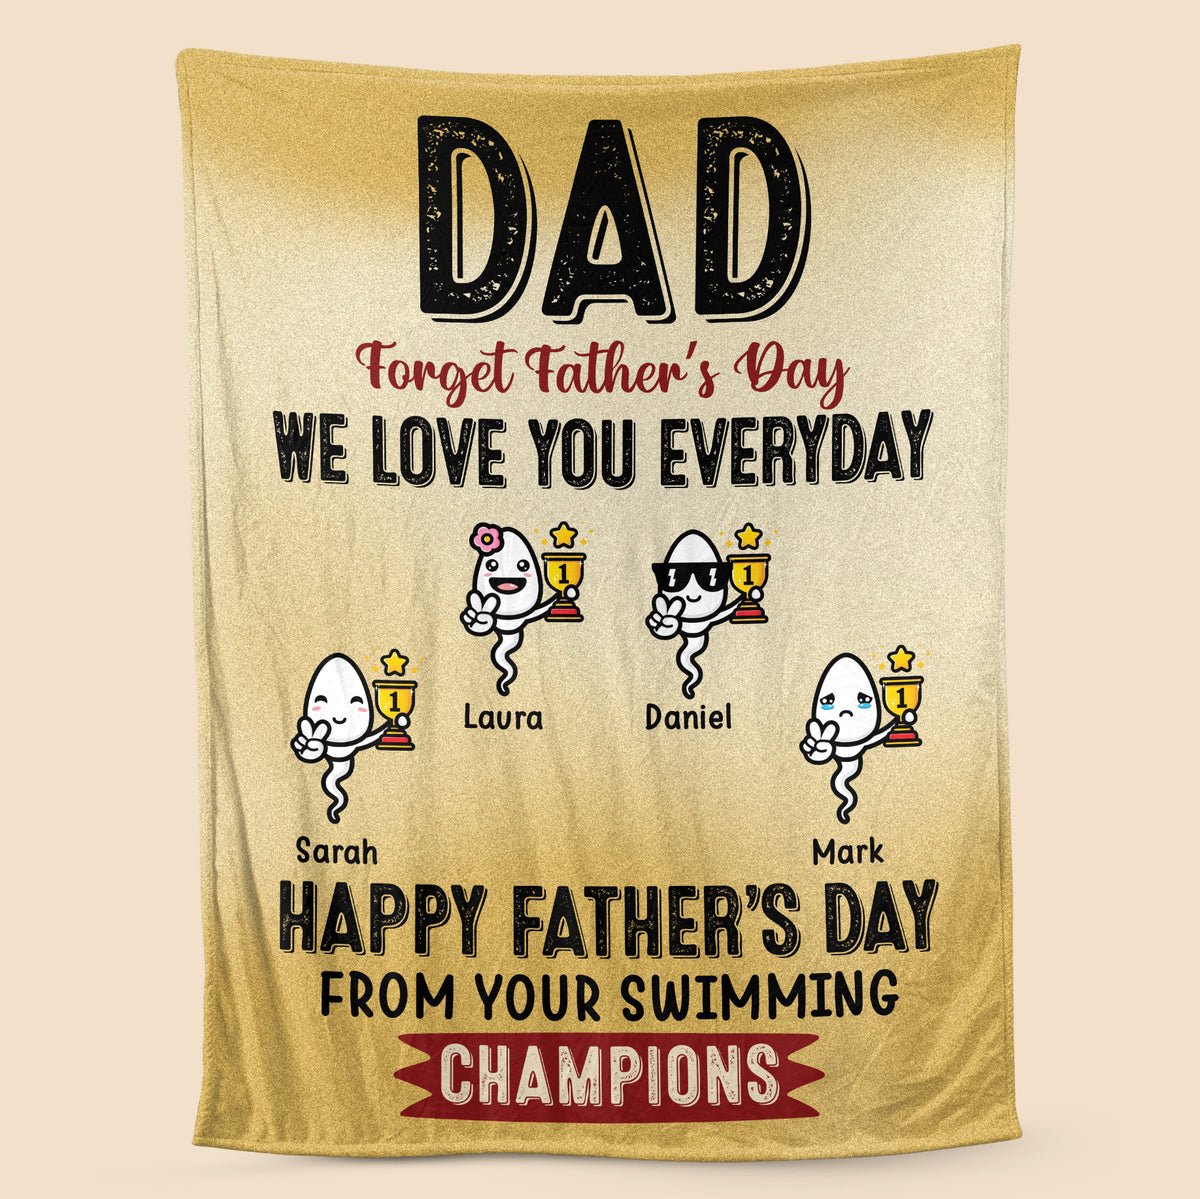 Happy Father's Day From Your Swimming Champions - Personalized Blanket - Best Gift For Father - Giftago